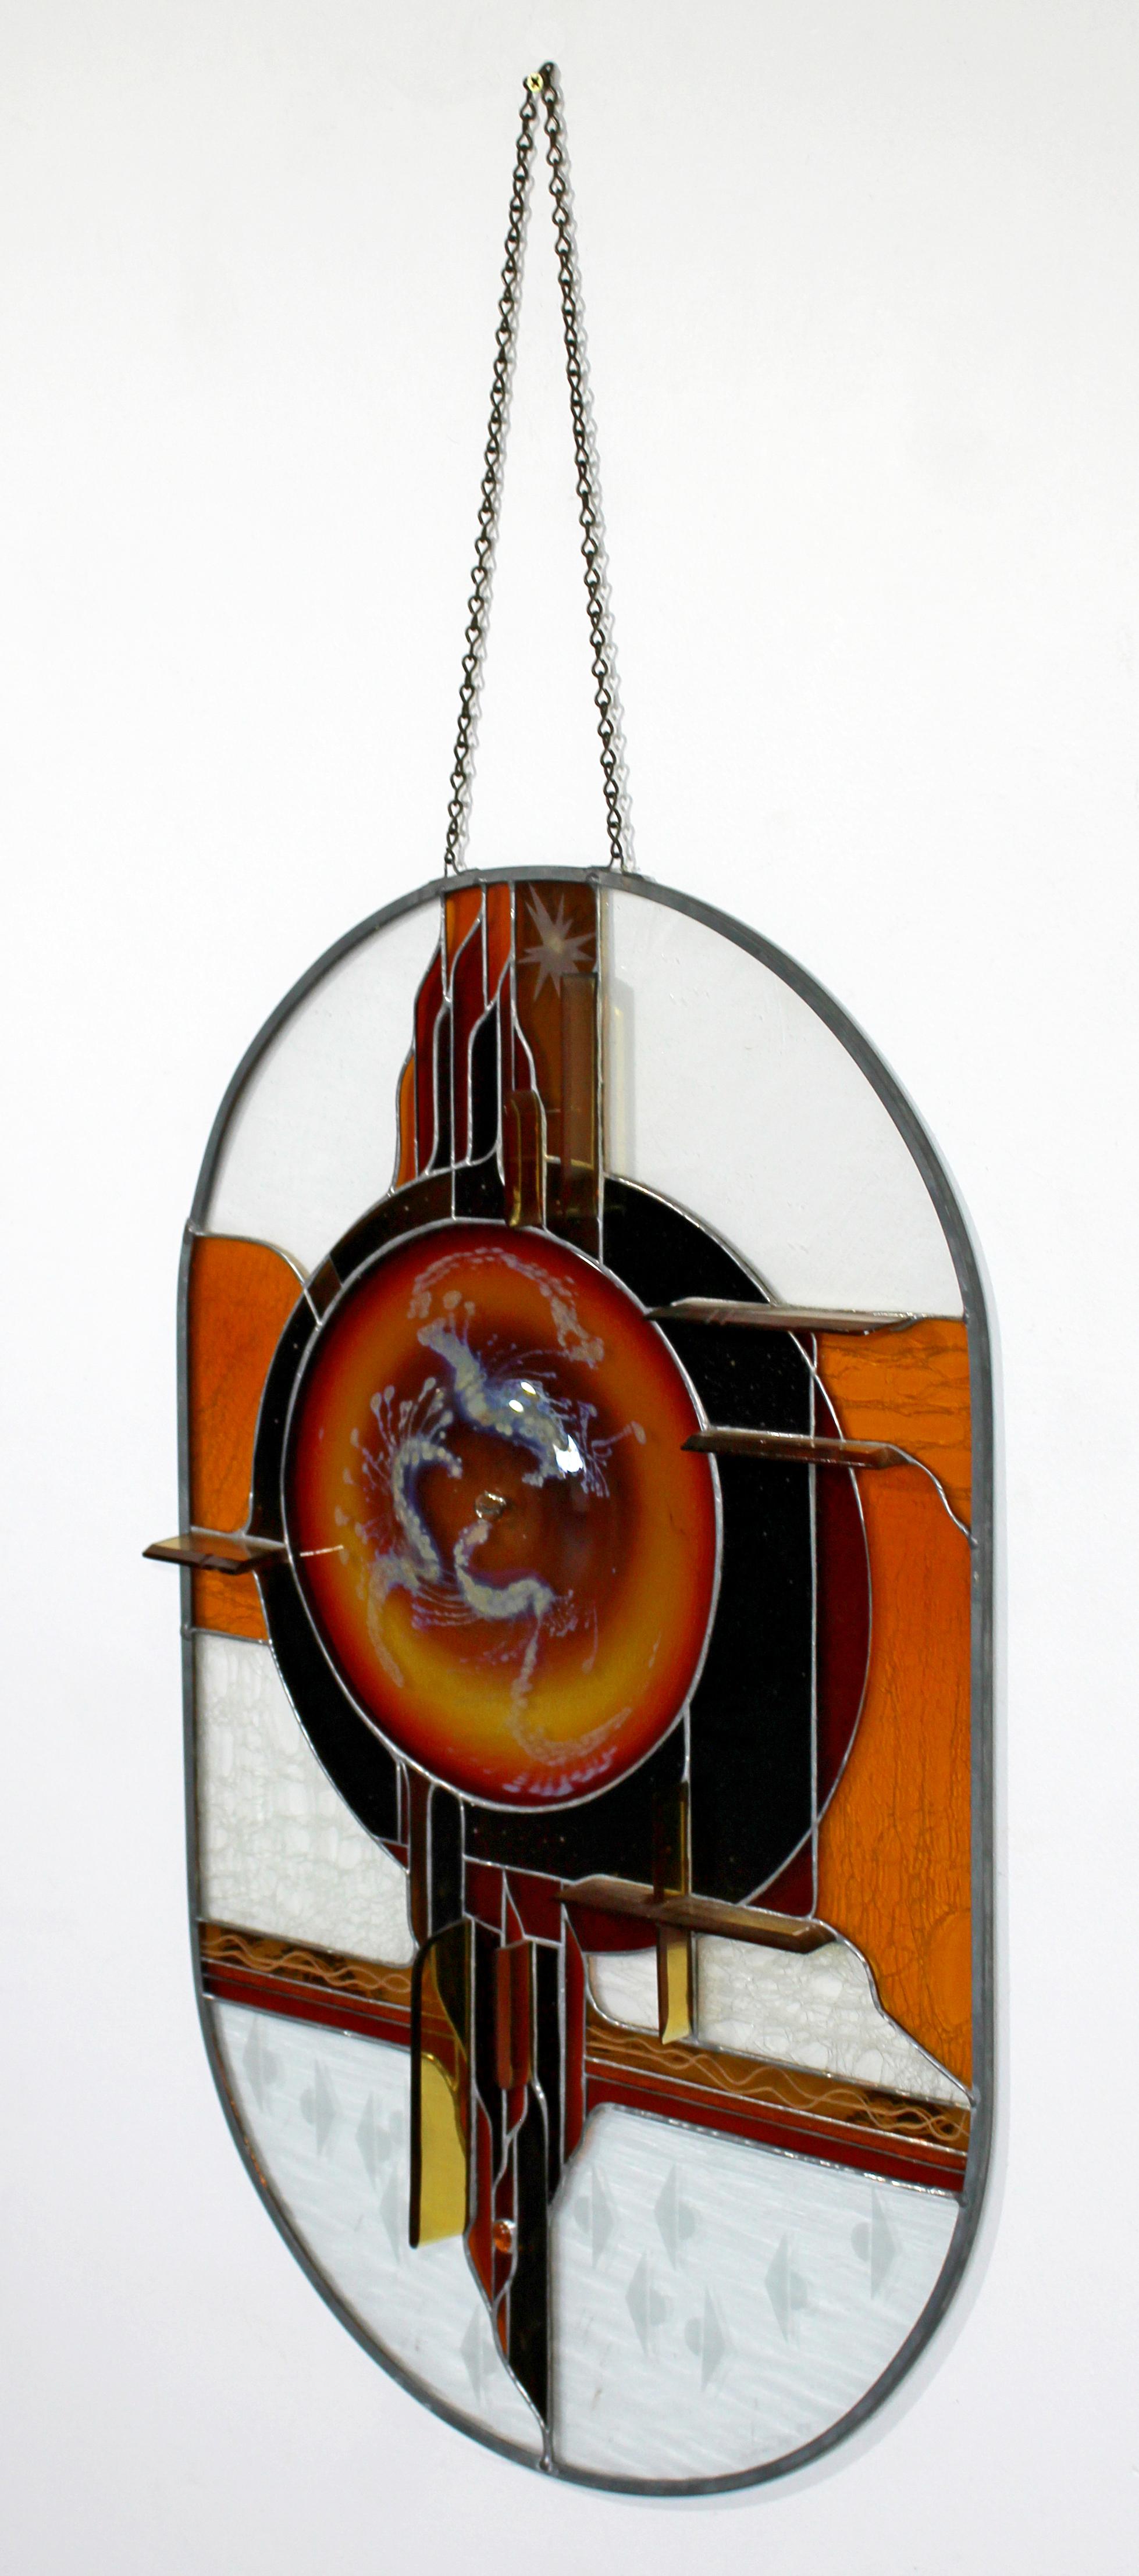 For your consideration is a magnificent, stained glass, hanging art sculpture, by Toland Sands, circa the 1980s. In excellent condition. The dimensions are 17.5